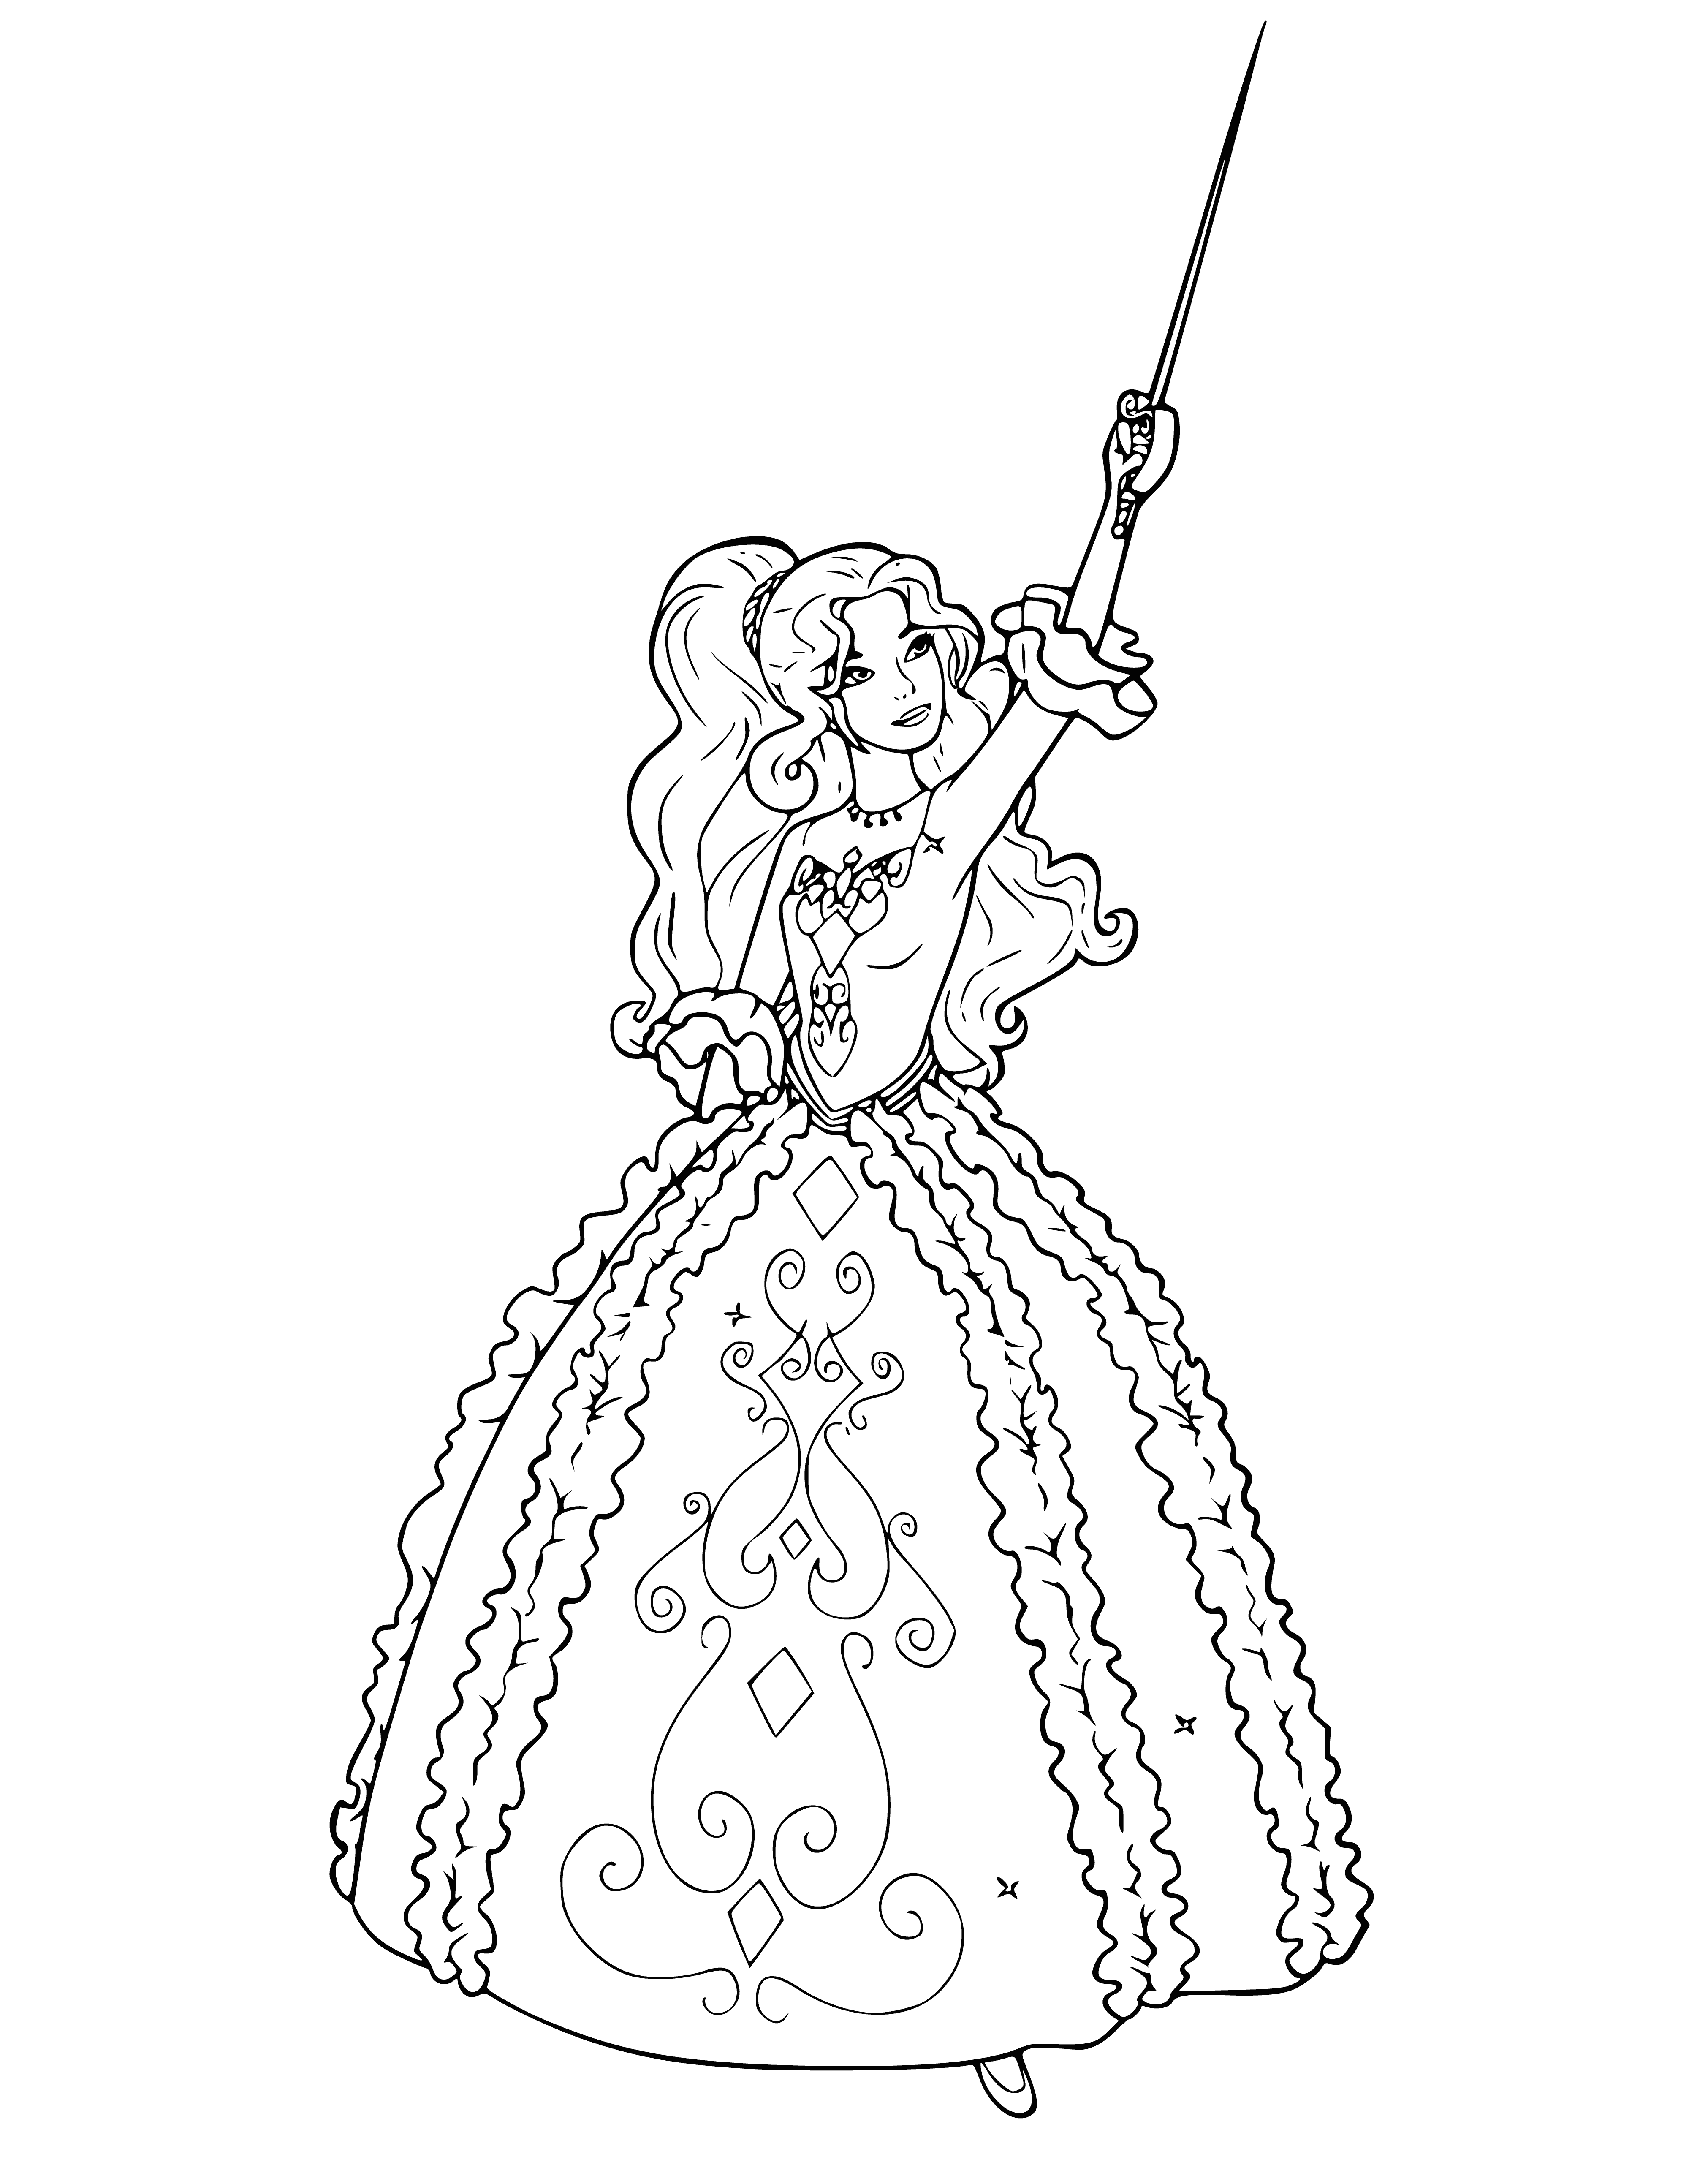 coloring page: She stands tall, ready for battle!

Barbie is a fearless musketeer ready for battle, dressed in a fluffy dress and carrying a sword!